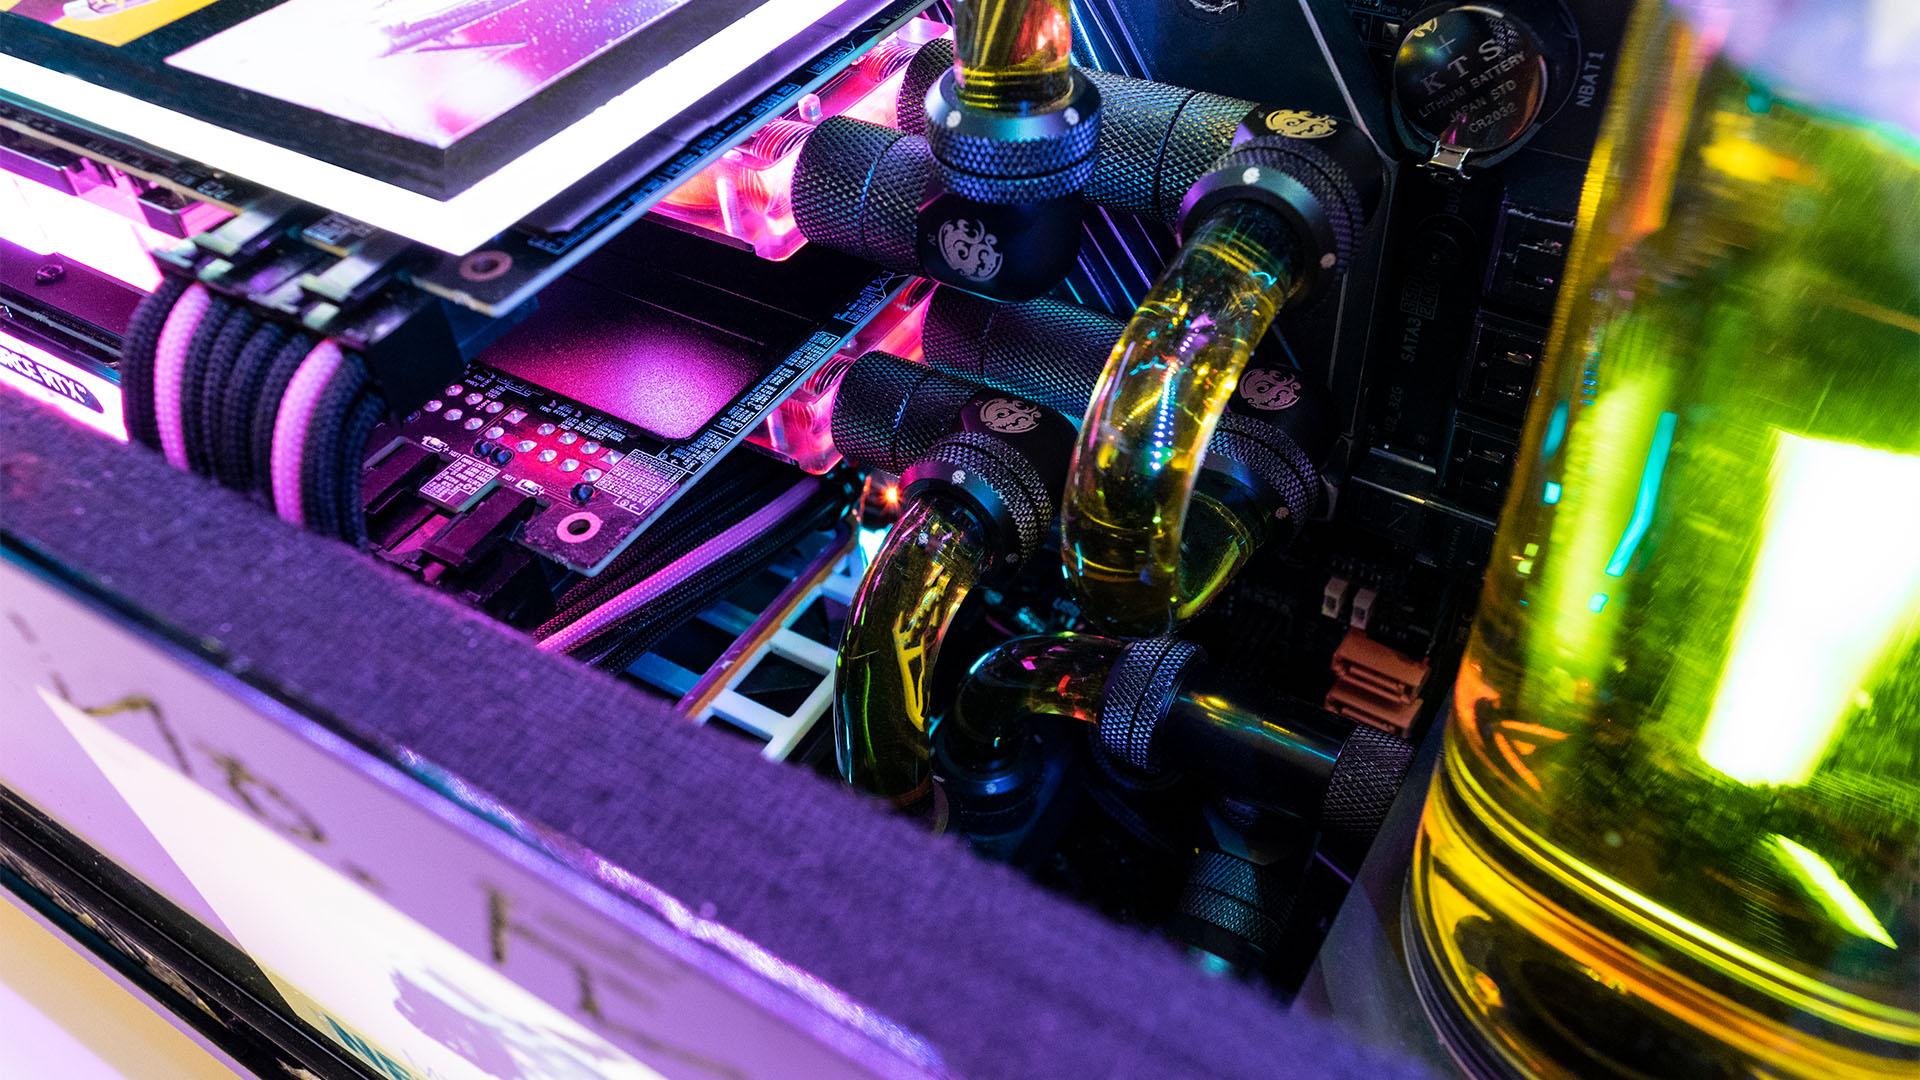 The yellow custom acrylic tubing for a Cyberpunk 2077 water cooling loop